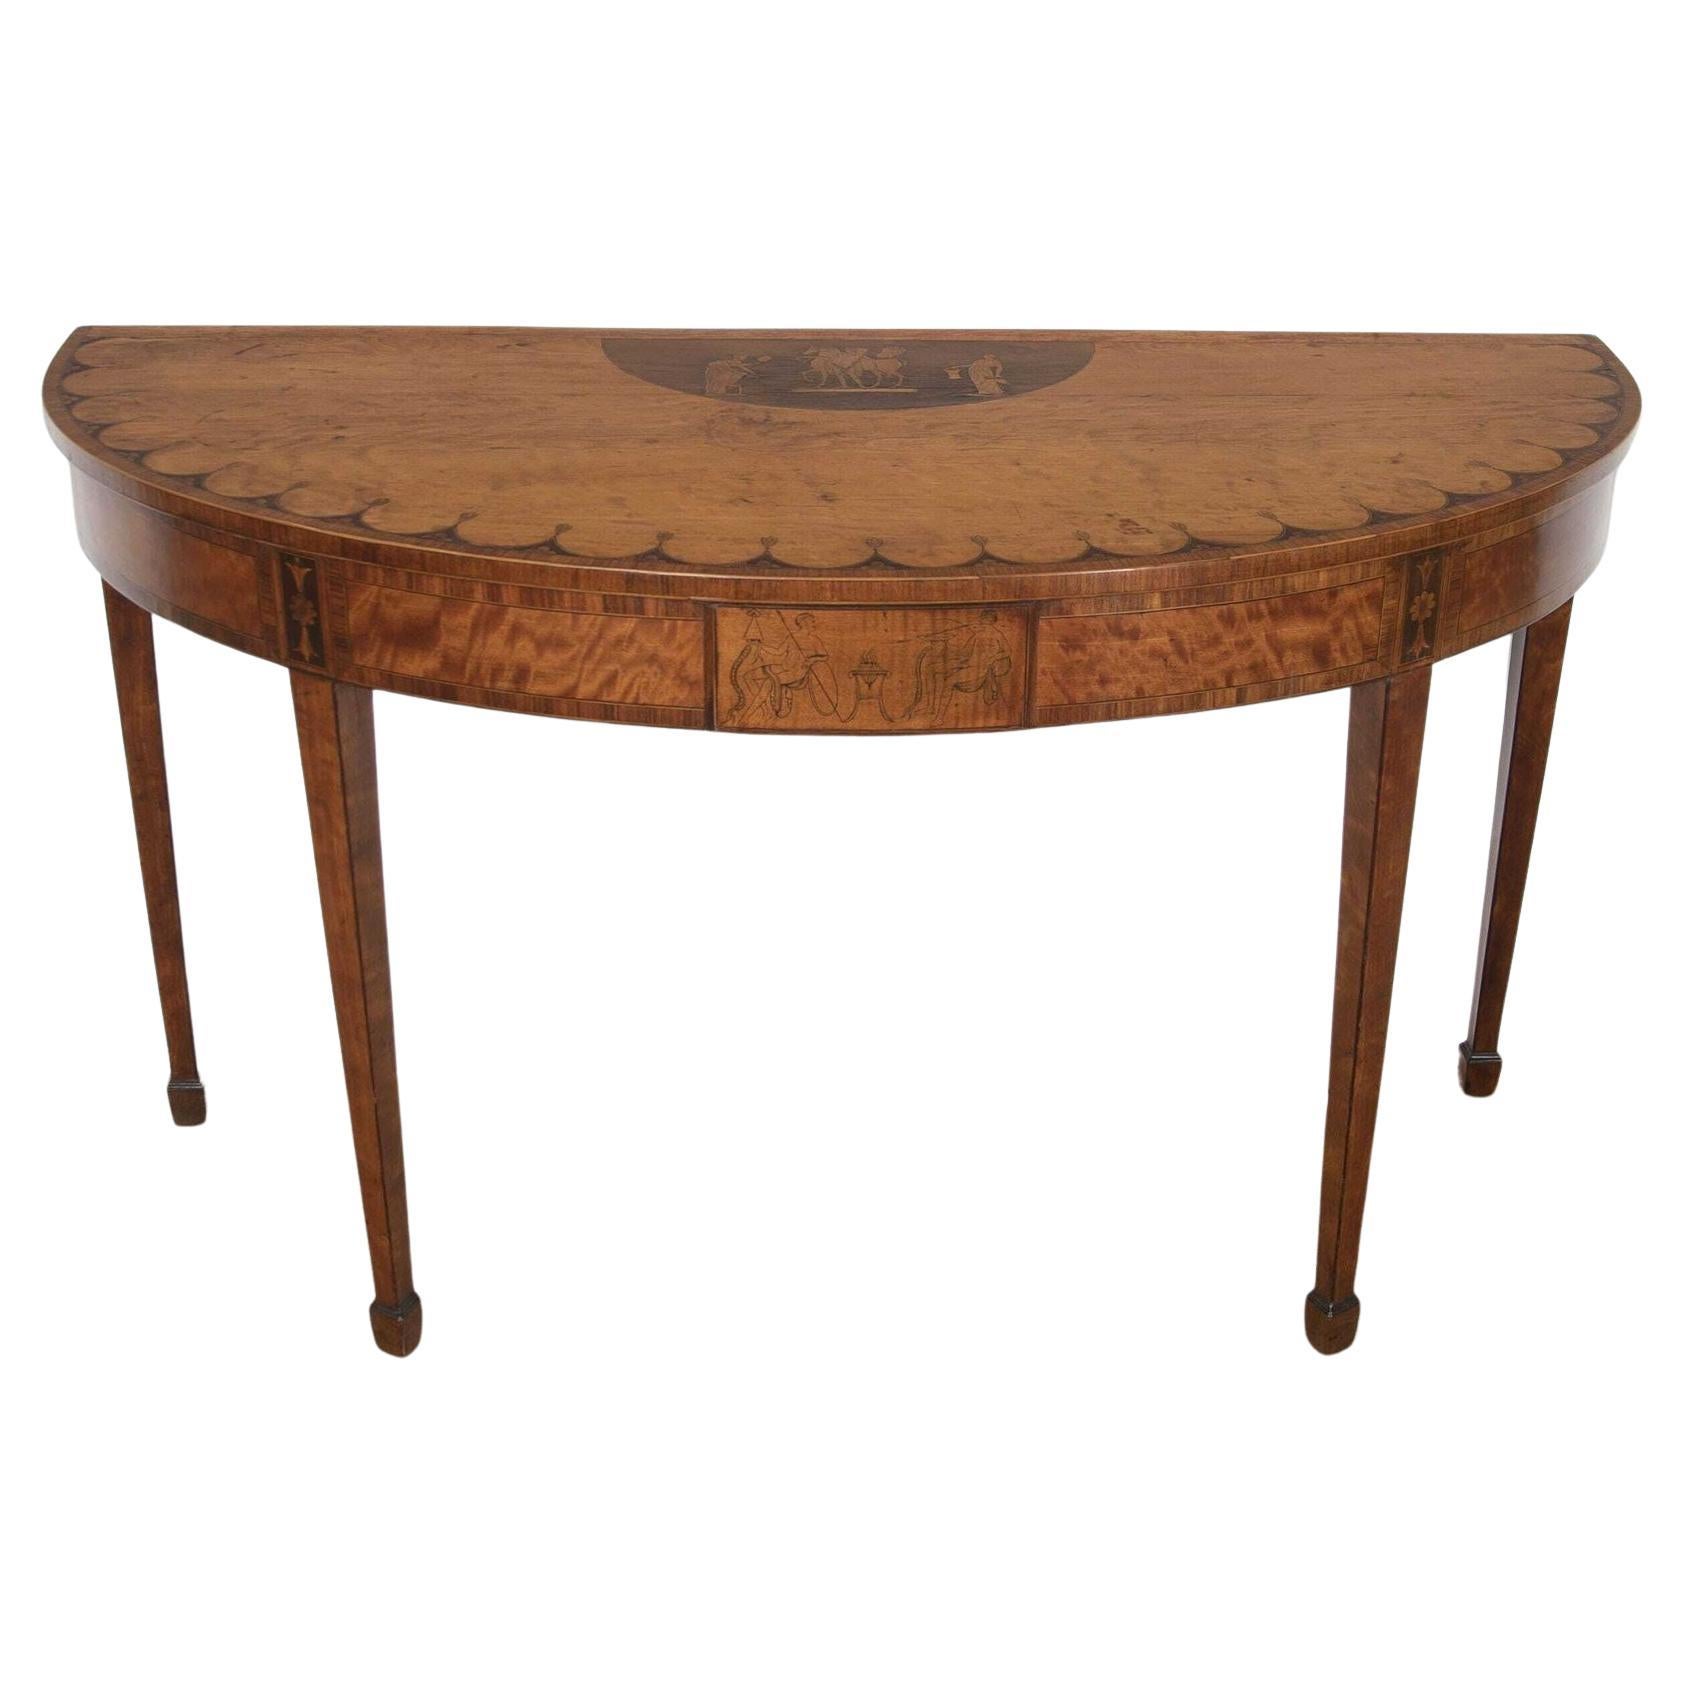 18th Century Satinwood Side Table